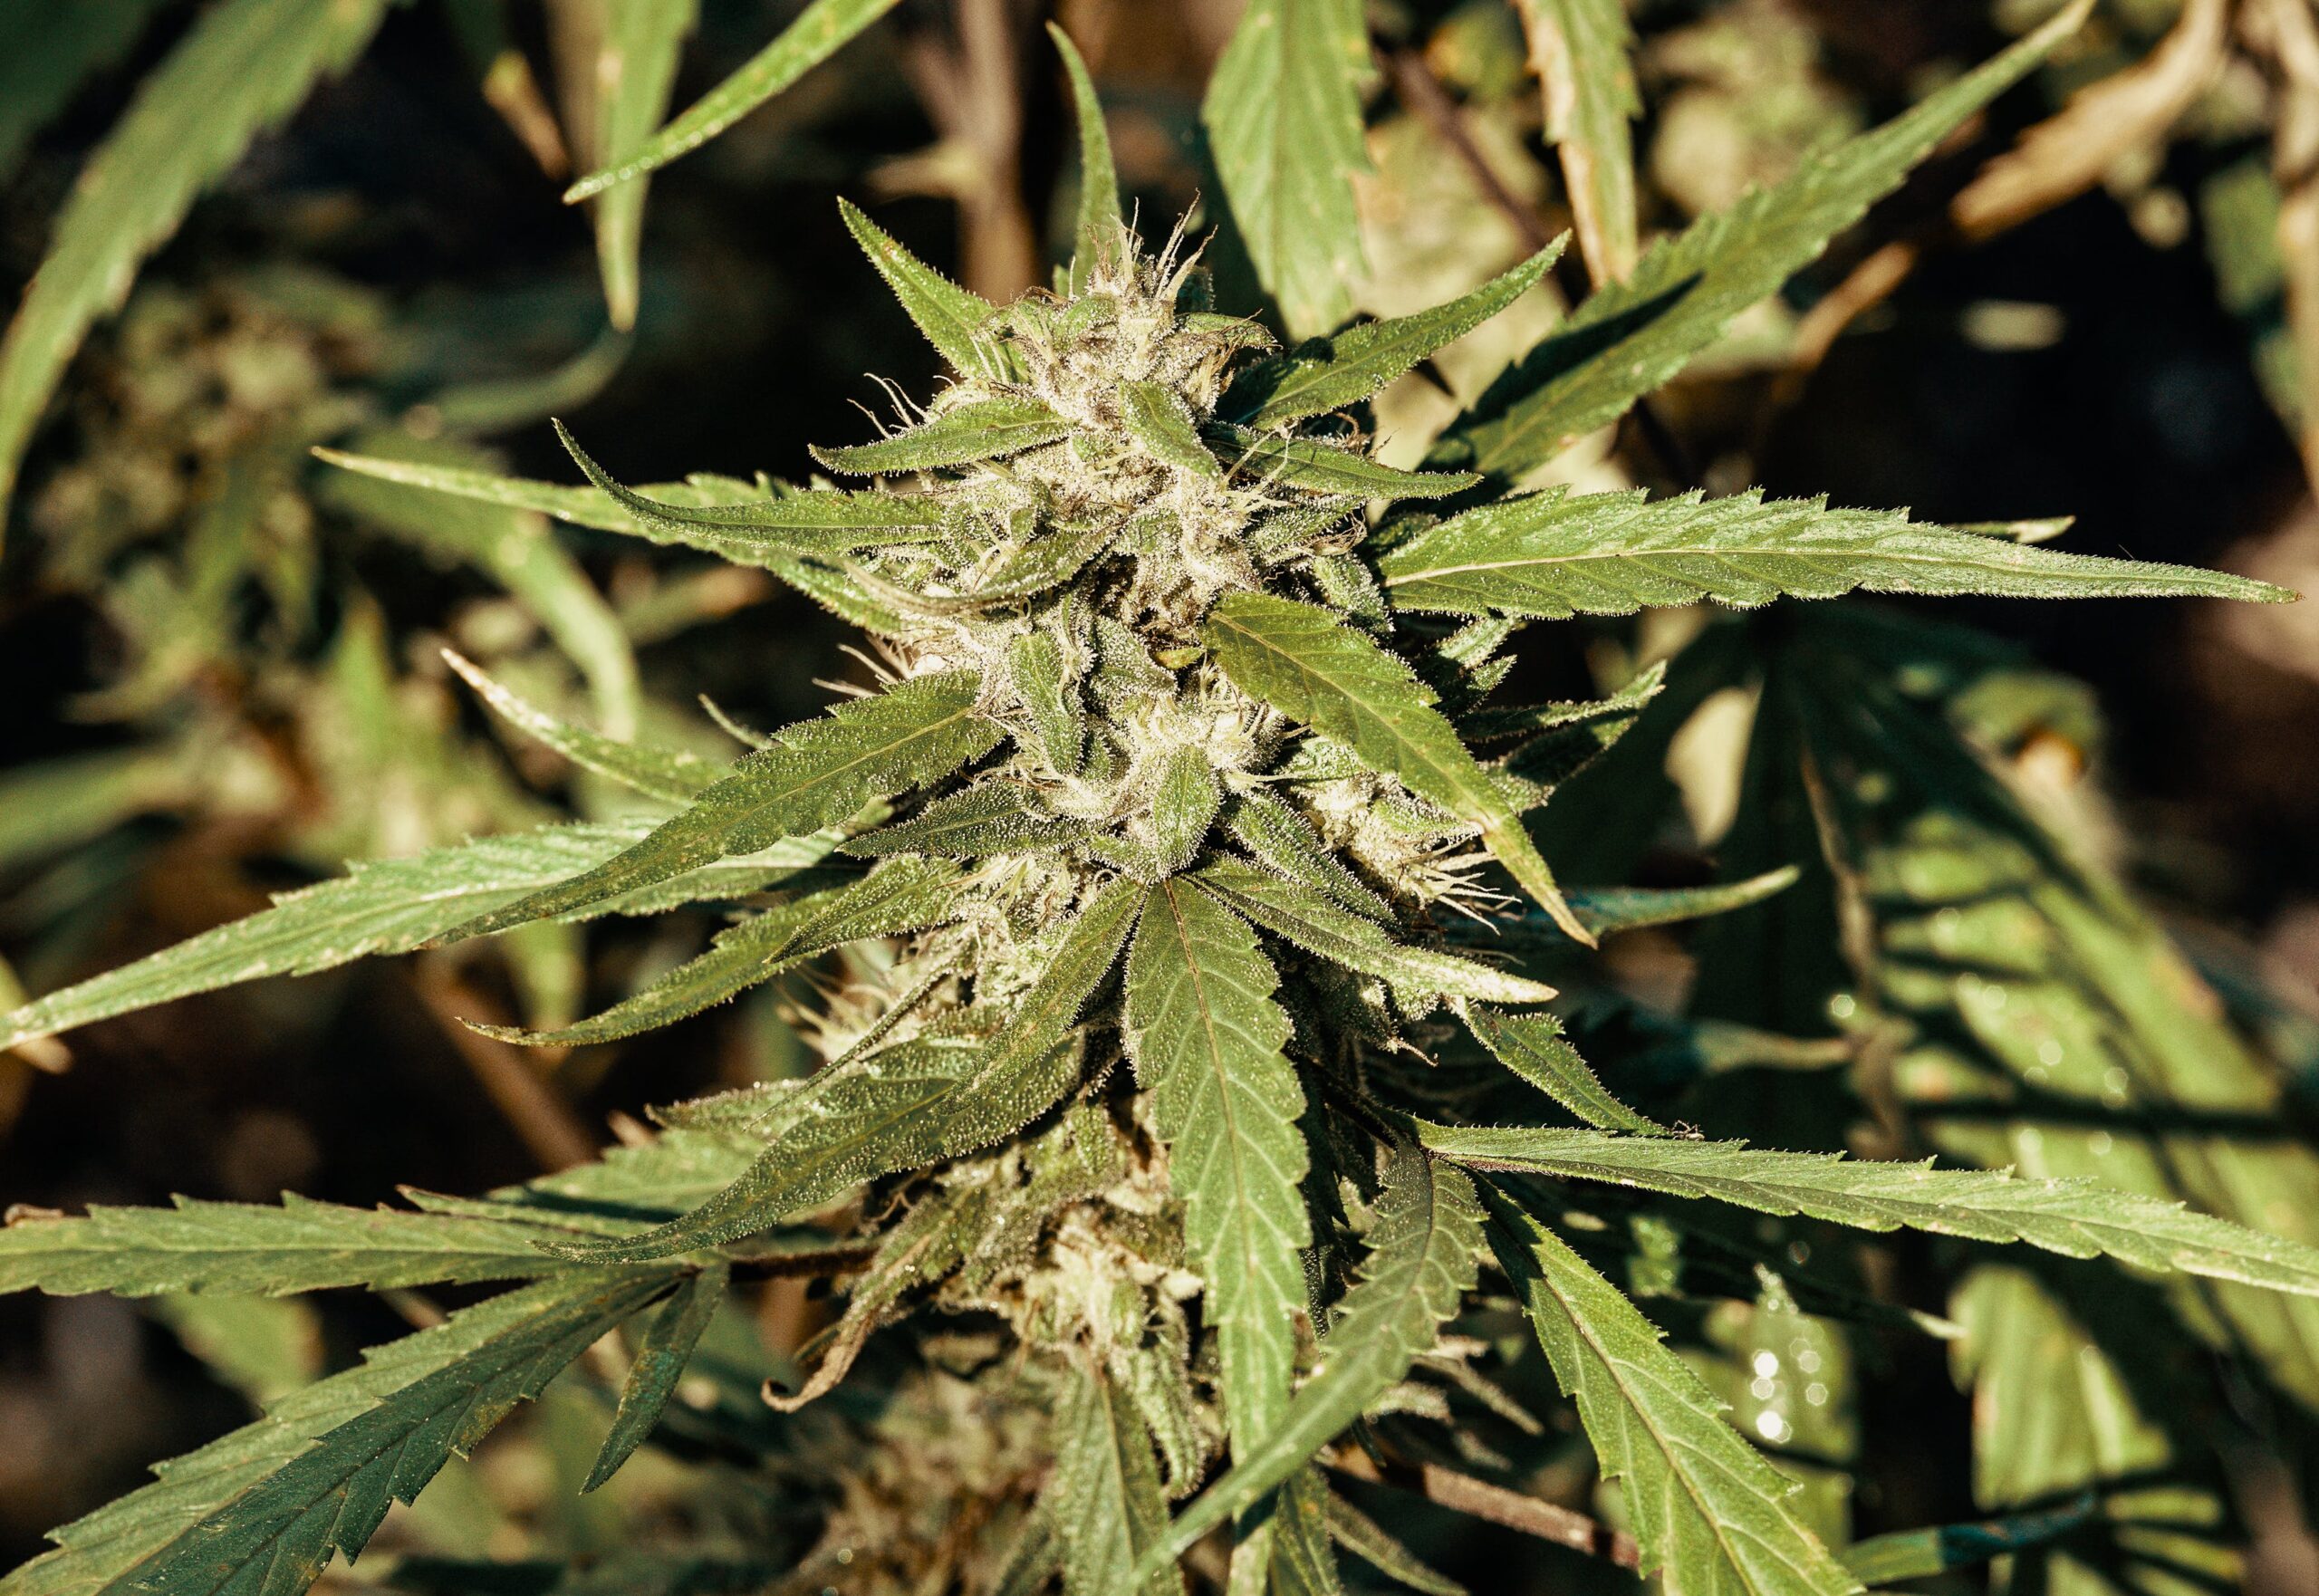 8 of the Most Popular Landrace Strains - DATOS